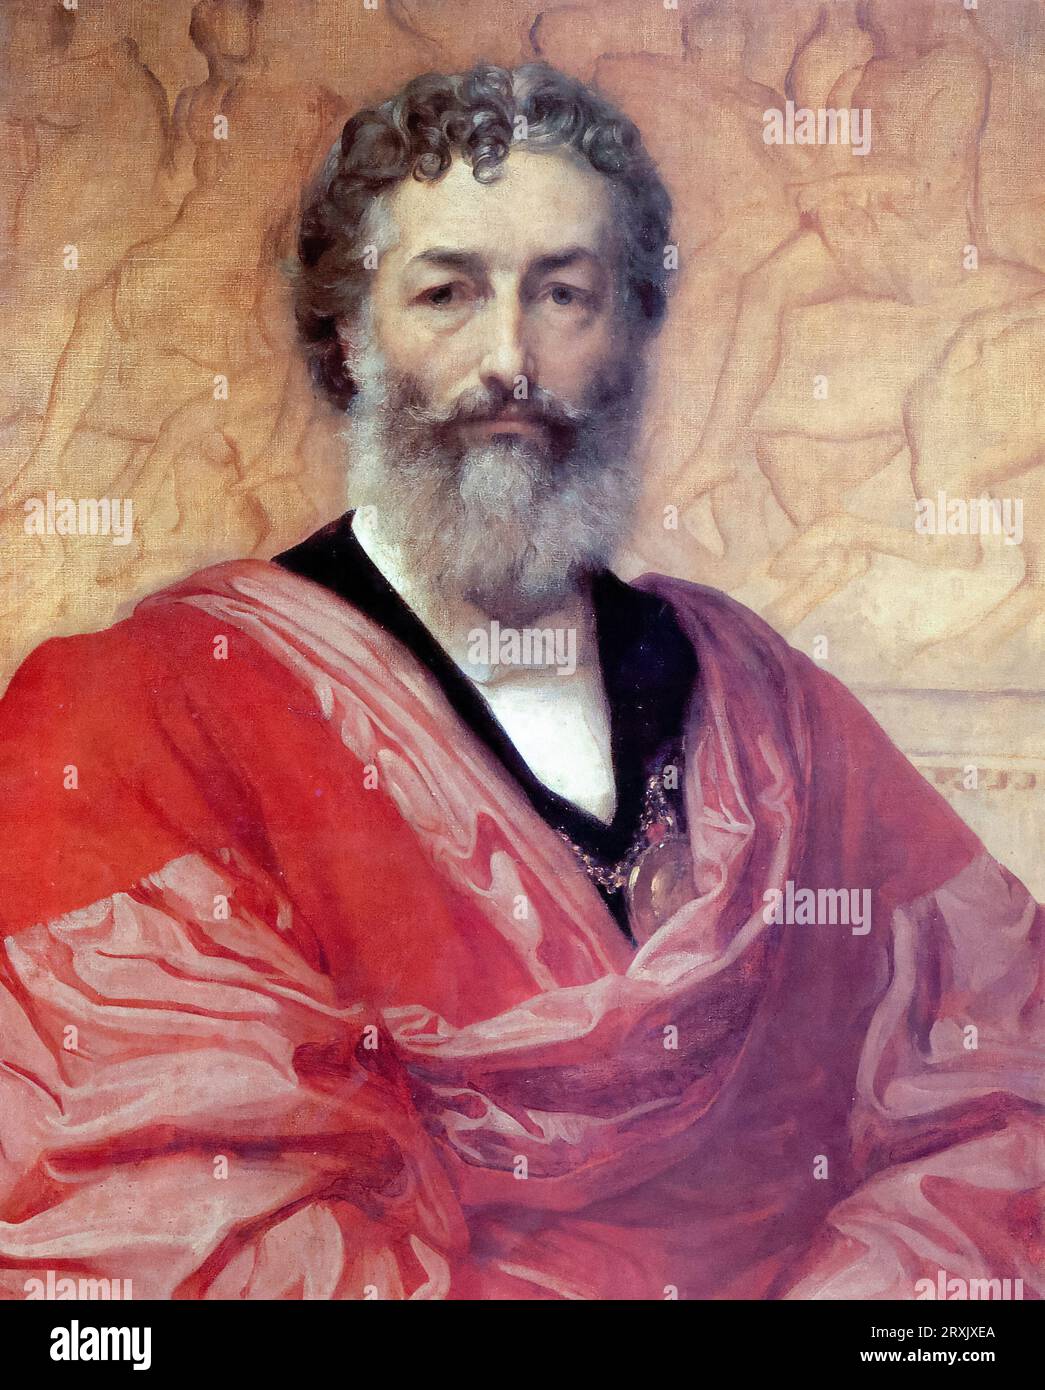 Frederic Leighton, 1st Baron Leighton (1830-1896), Self Portrait painting of the British Victorian painter, draughtsman, and sculptor, oil on canvas, 1880 Stock Photo